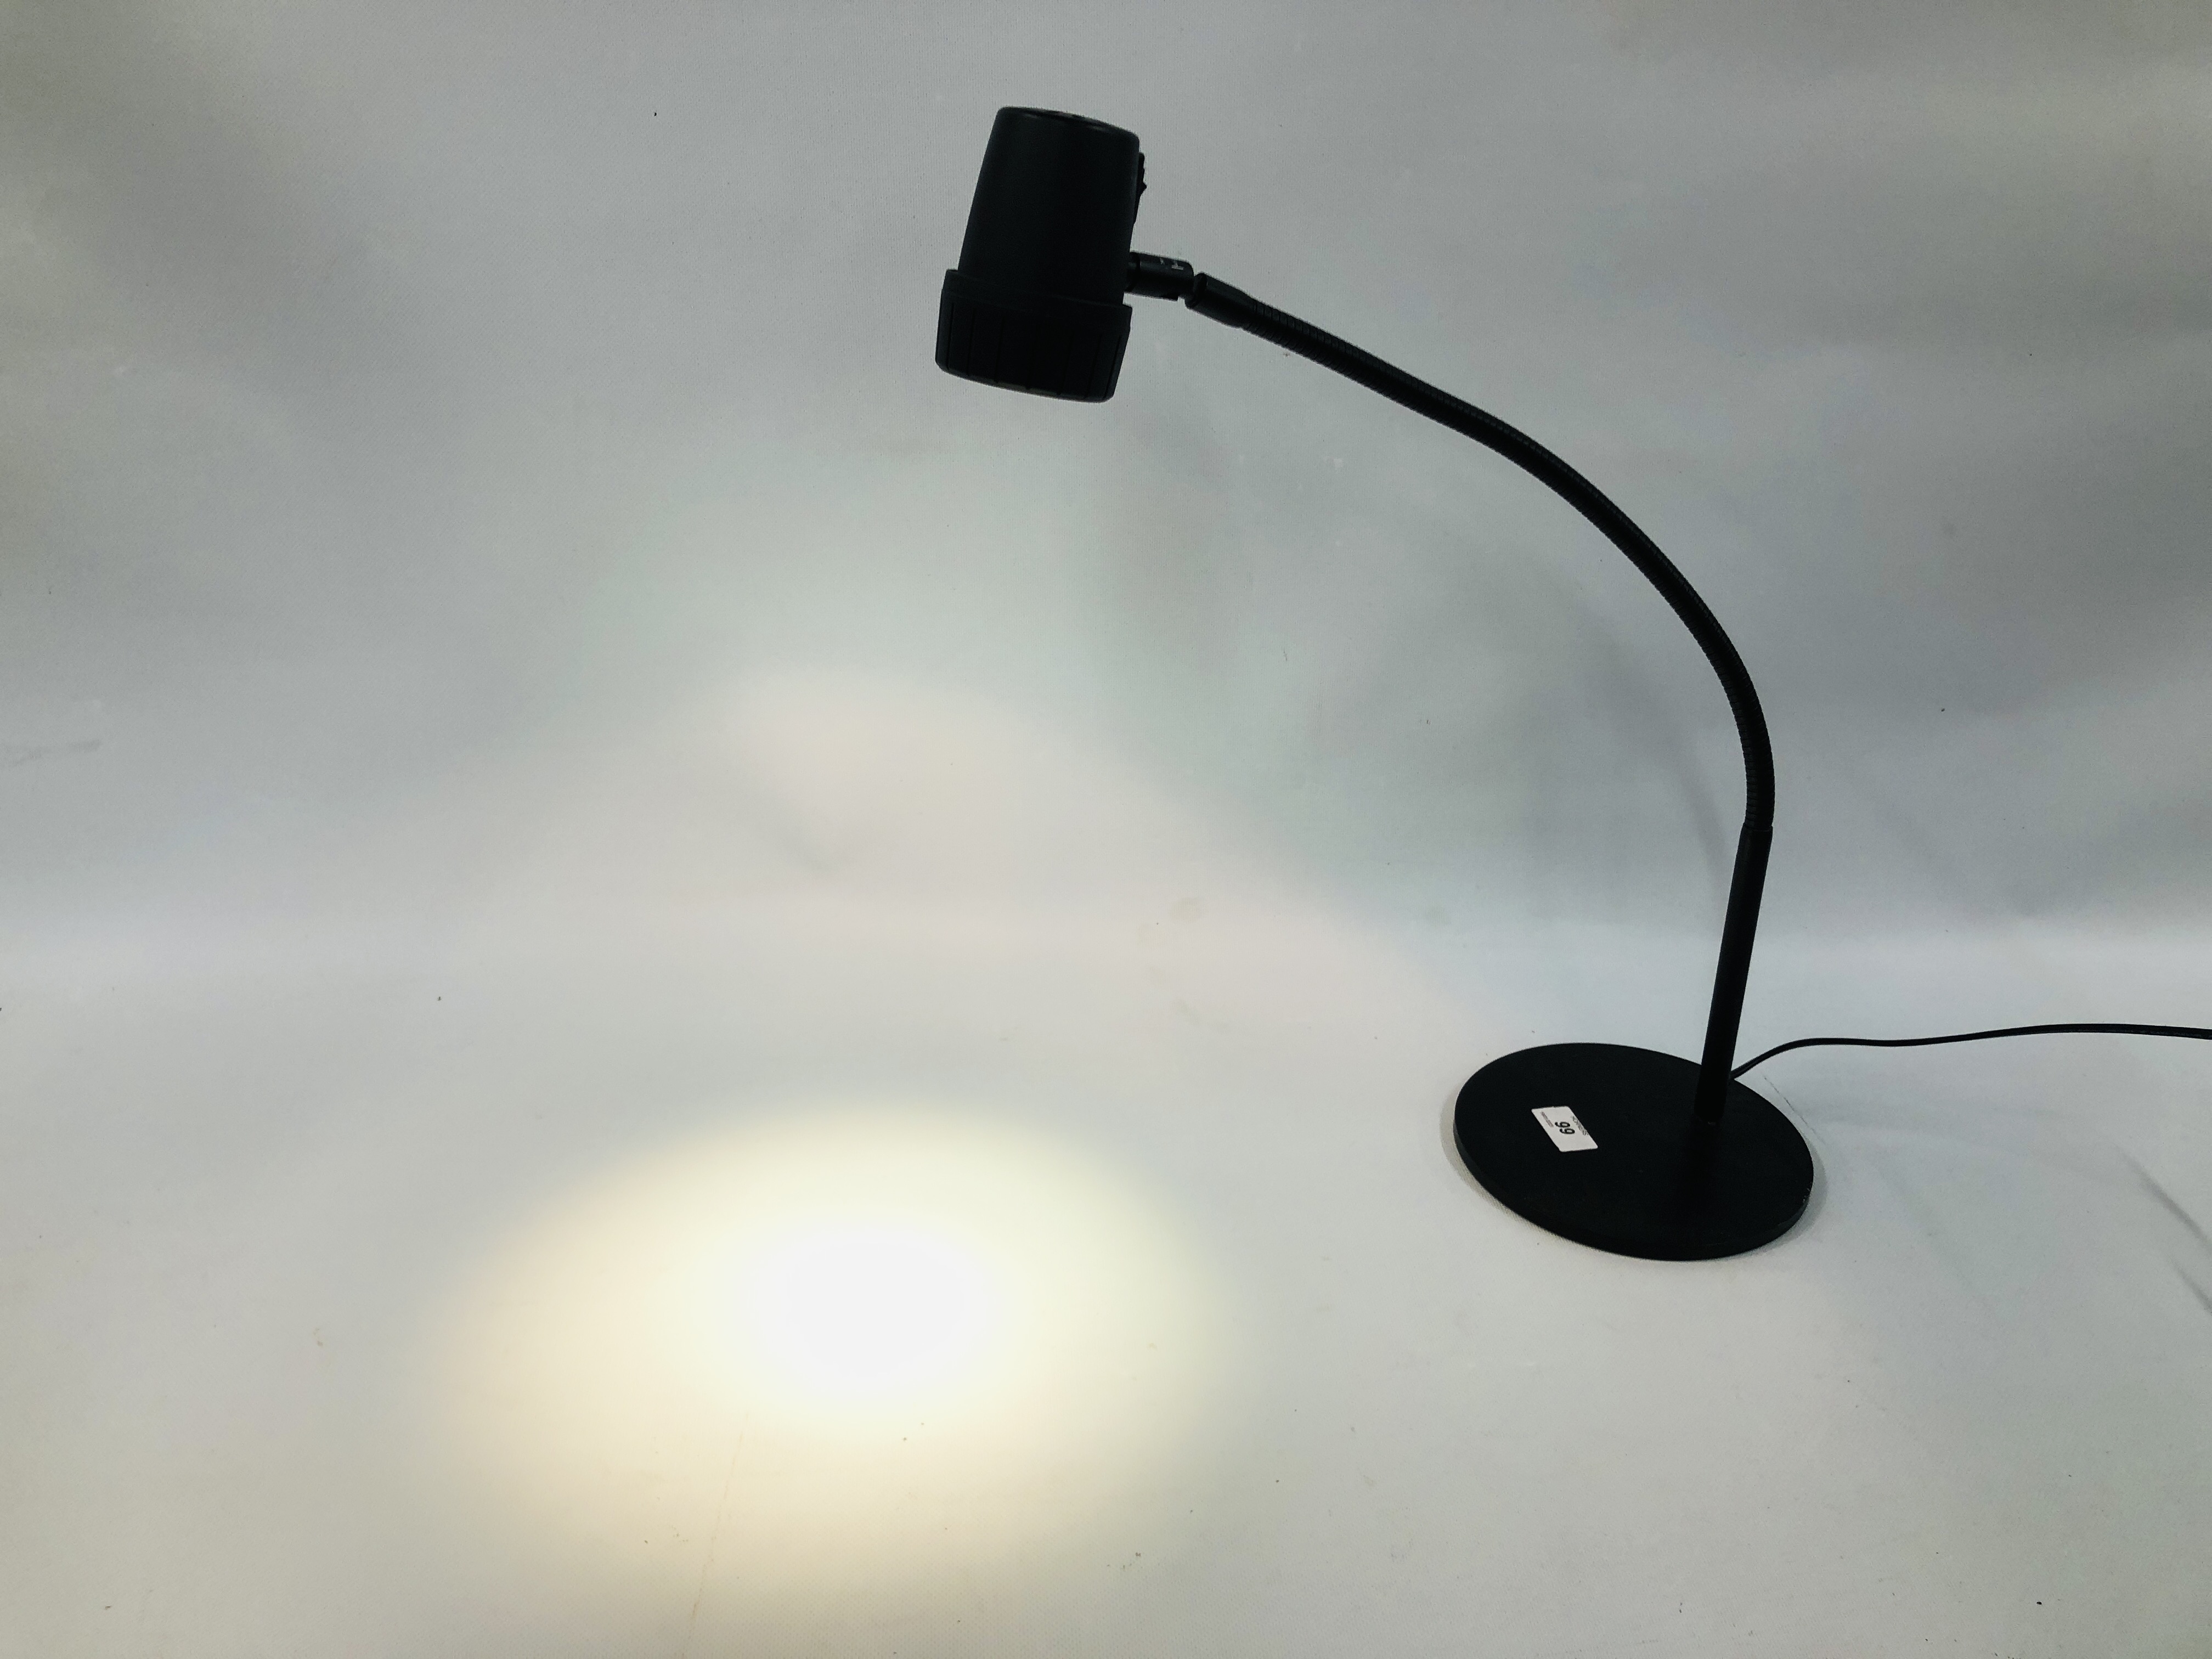 A "SERIOUS READERS" ANGLE POISE READING LAMP - SOLD AS SEEN.